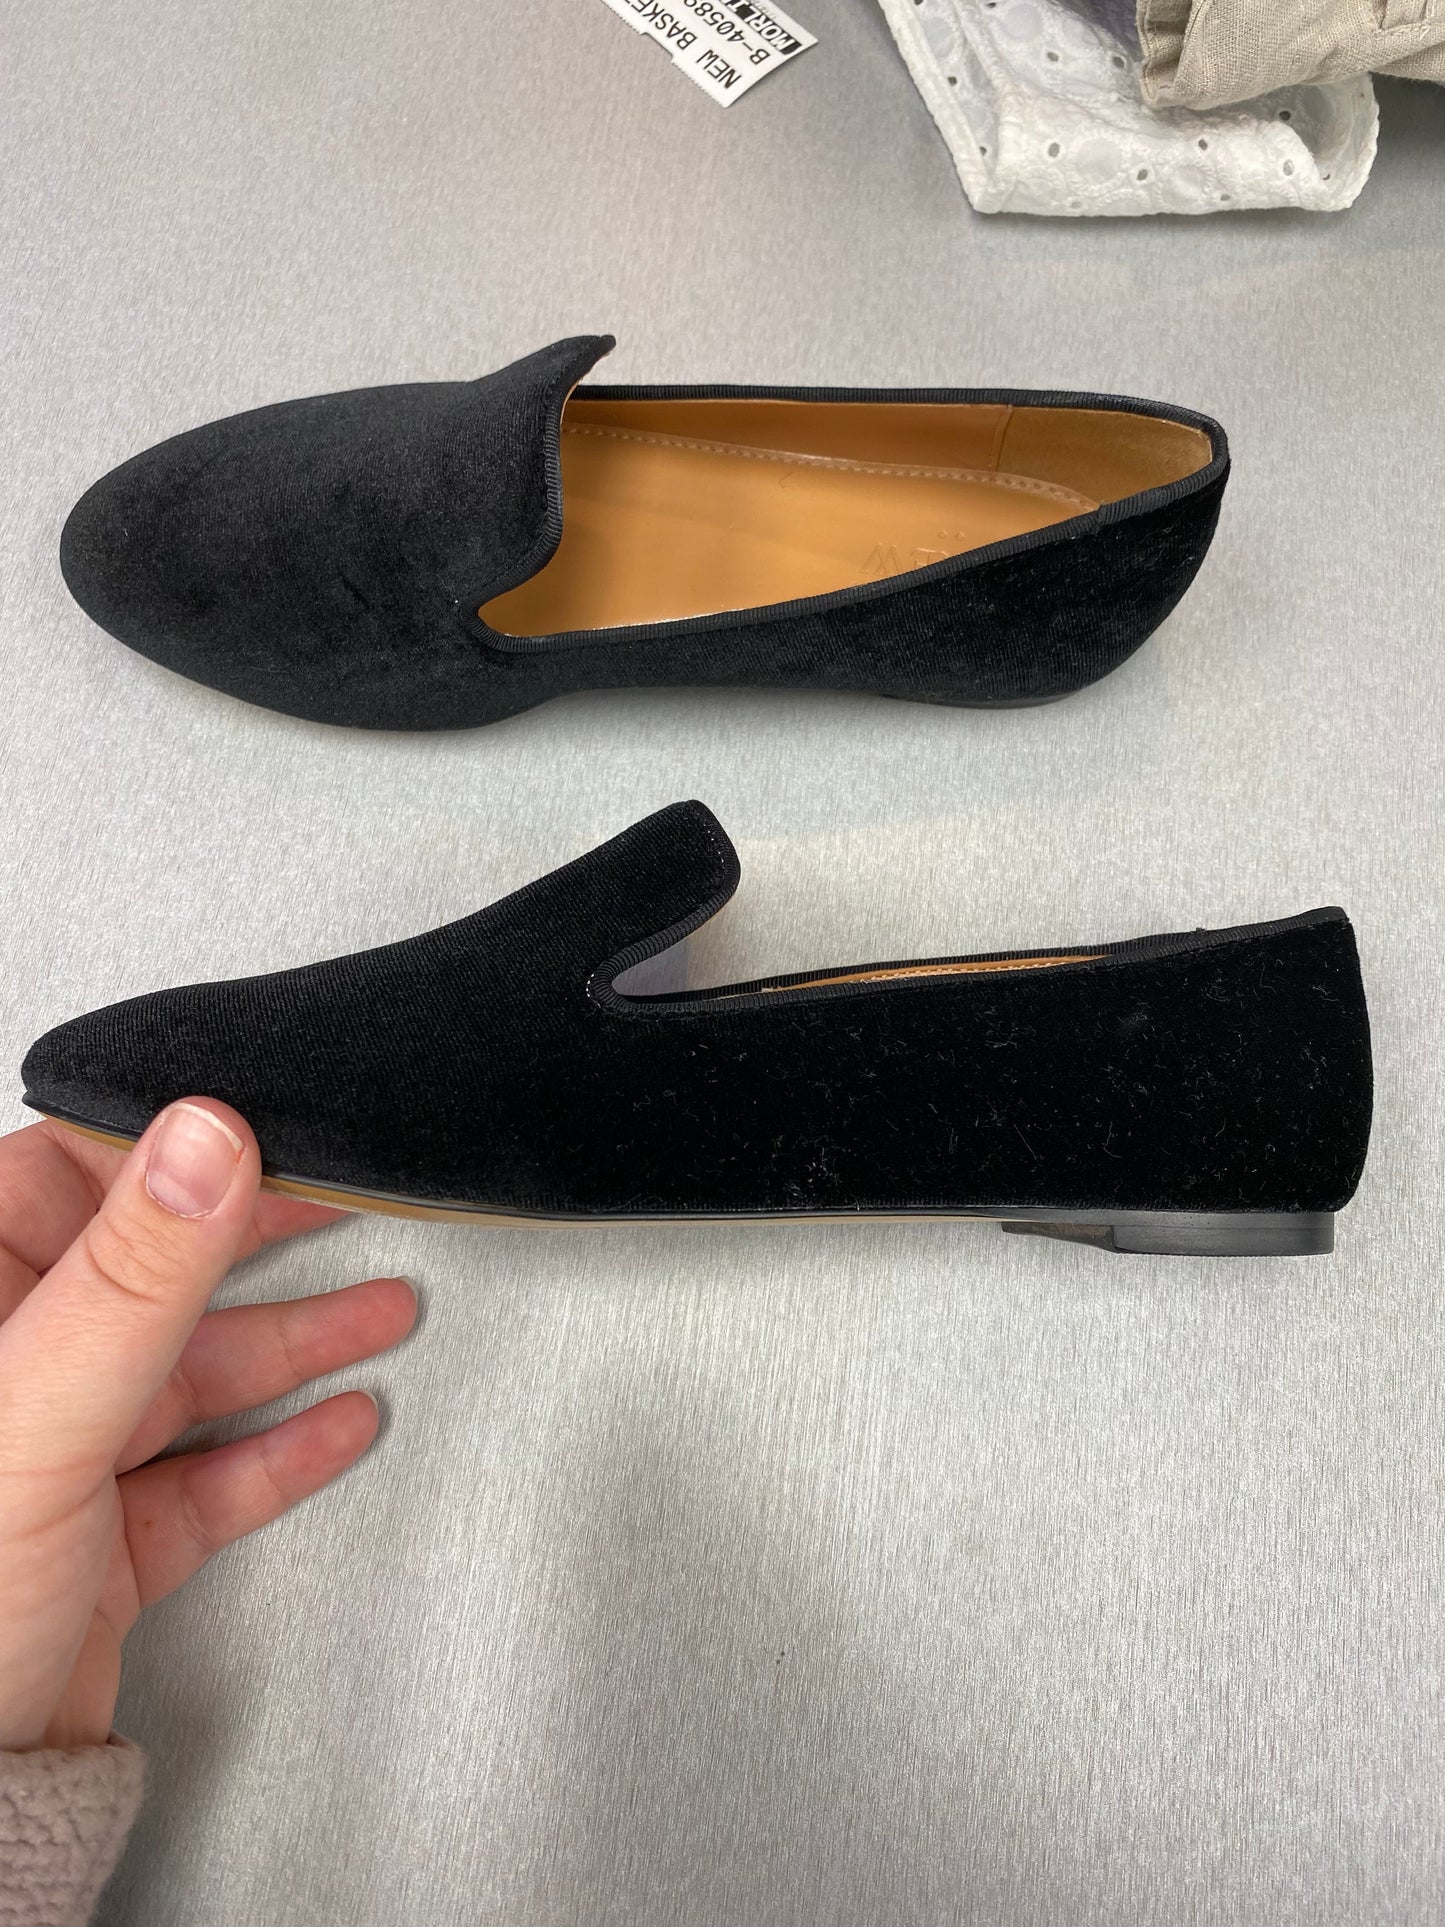 Shoes Flats Loafer Oxford By J Crew O  Size: 6.5